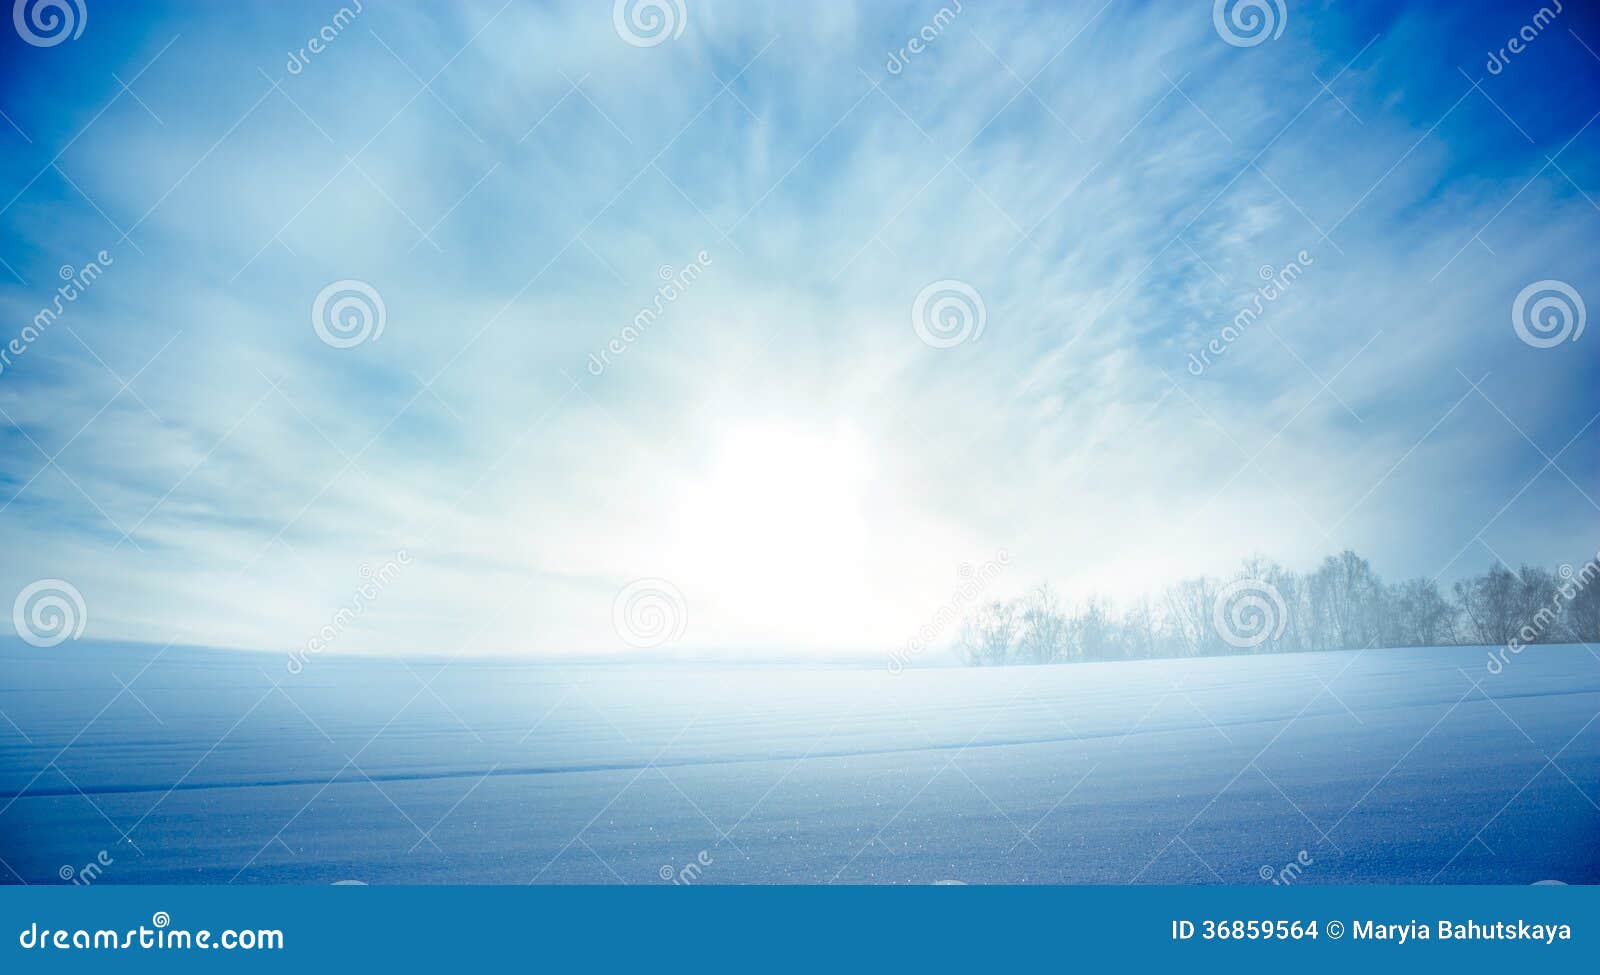 Winter Landscape with Snowy Field and Rising Sun